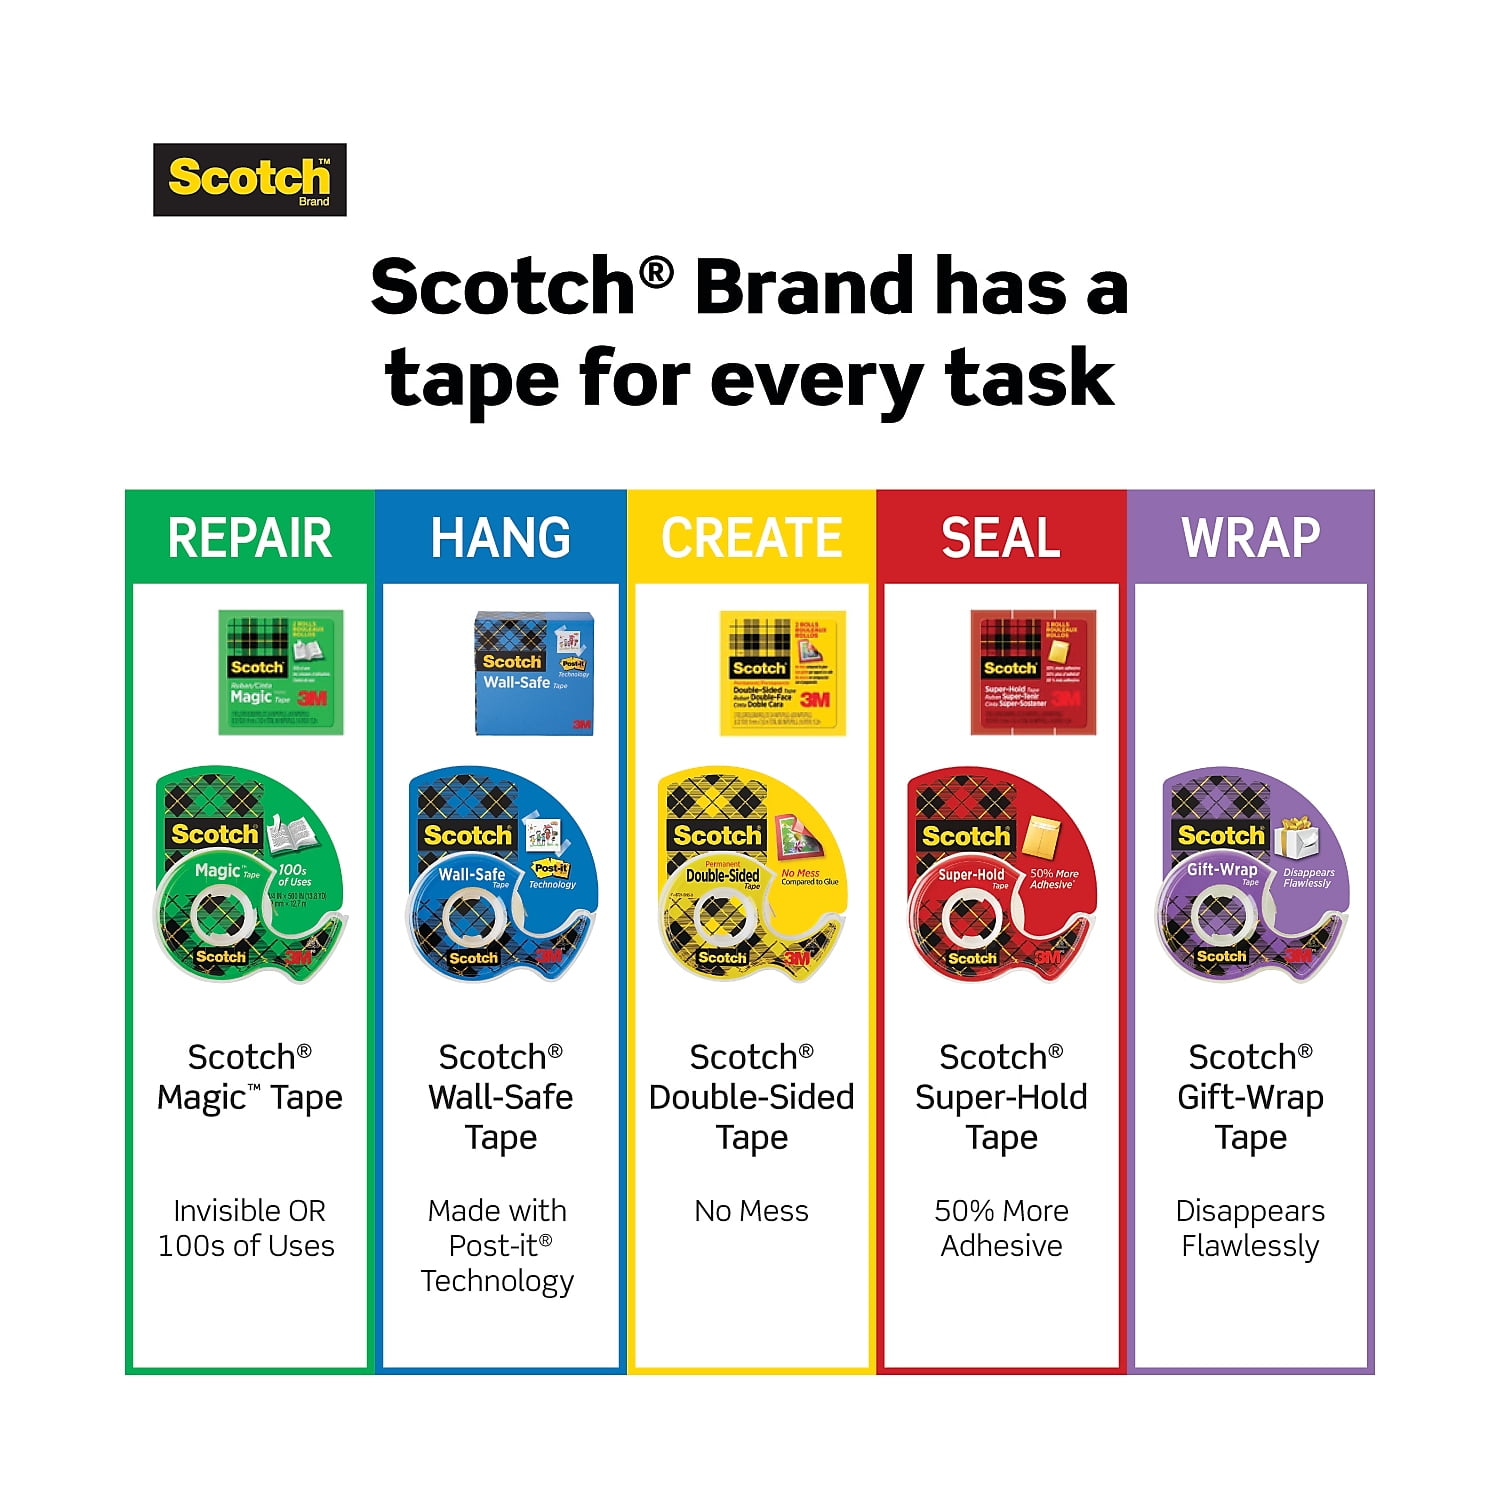 Scotch® Double Sided Tape, 136-NA, 1/2 in x 6.9 yd (12.7 mm x 6.3